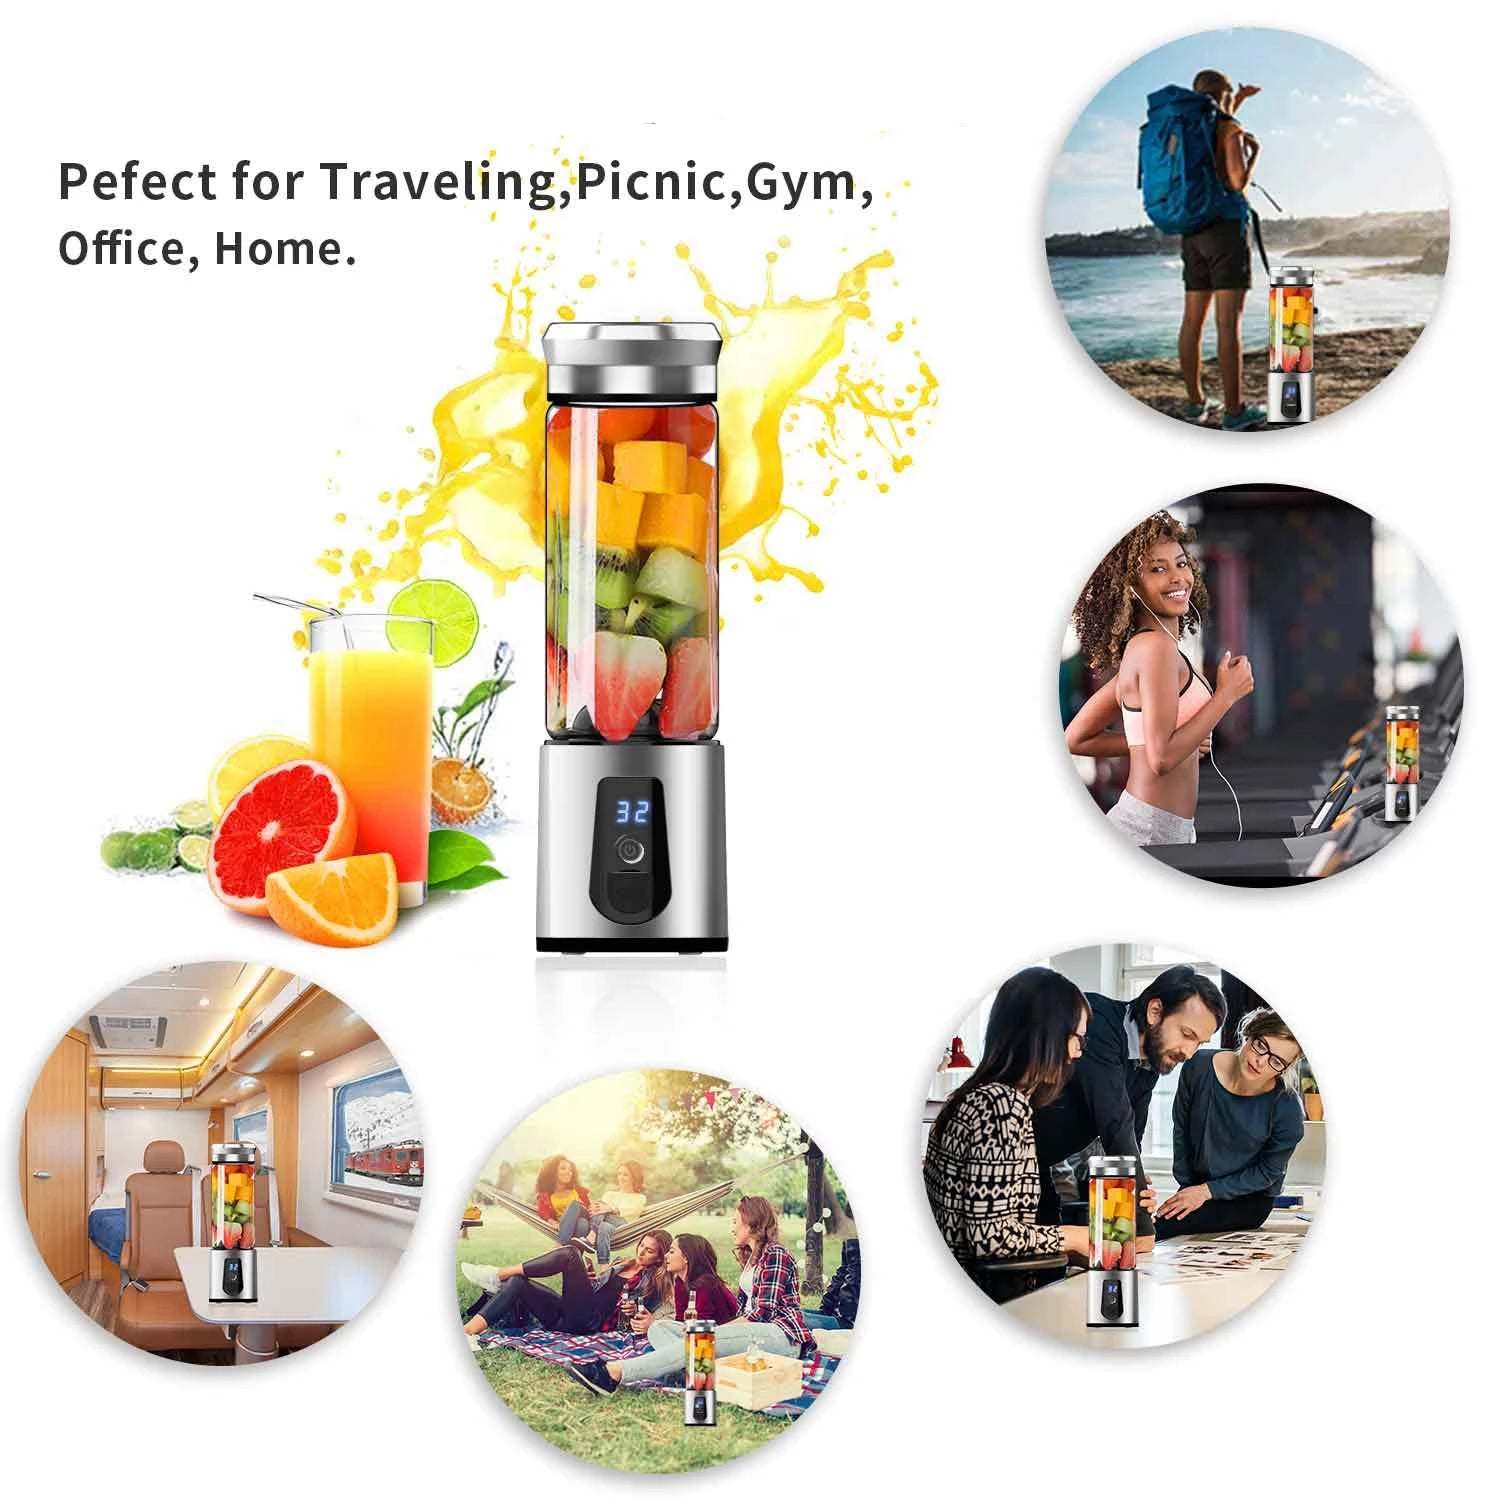 Using the JuiceUp N Go Quick Portable Juicer And Smoothie Blender to create a variety of juices by crushing ice cubes.